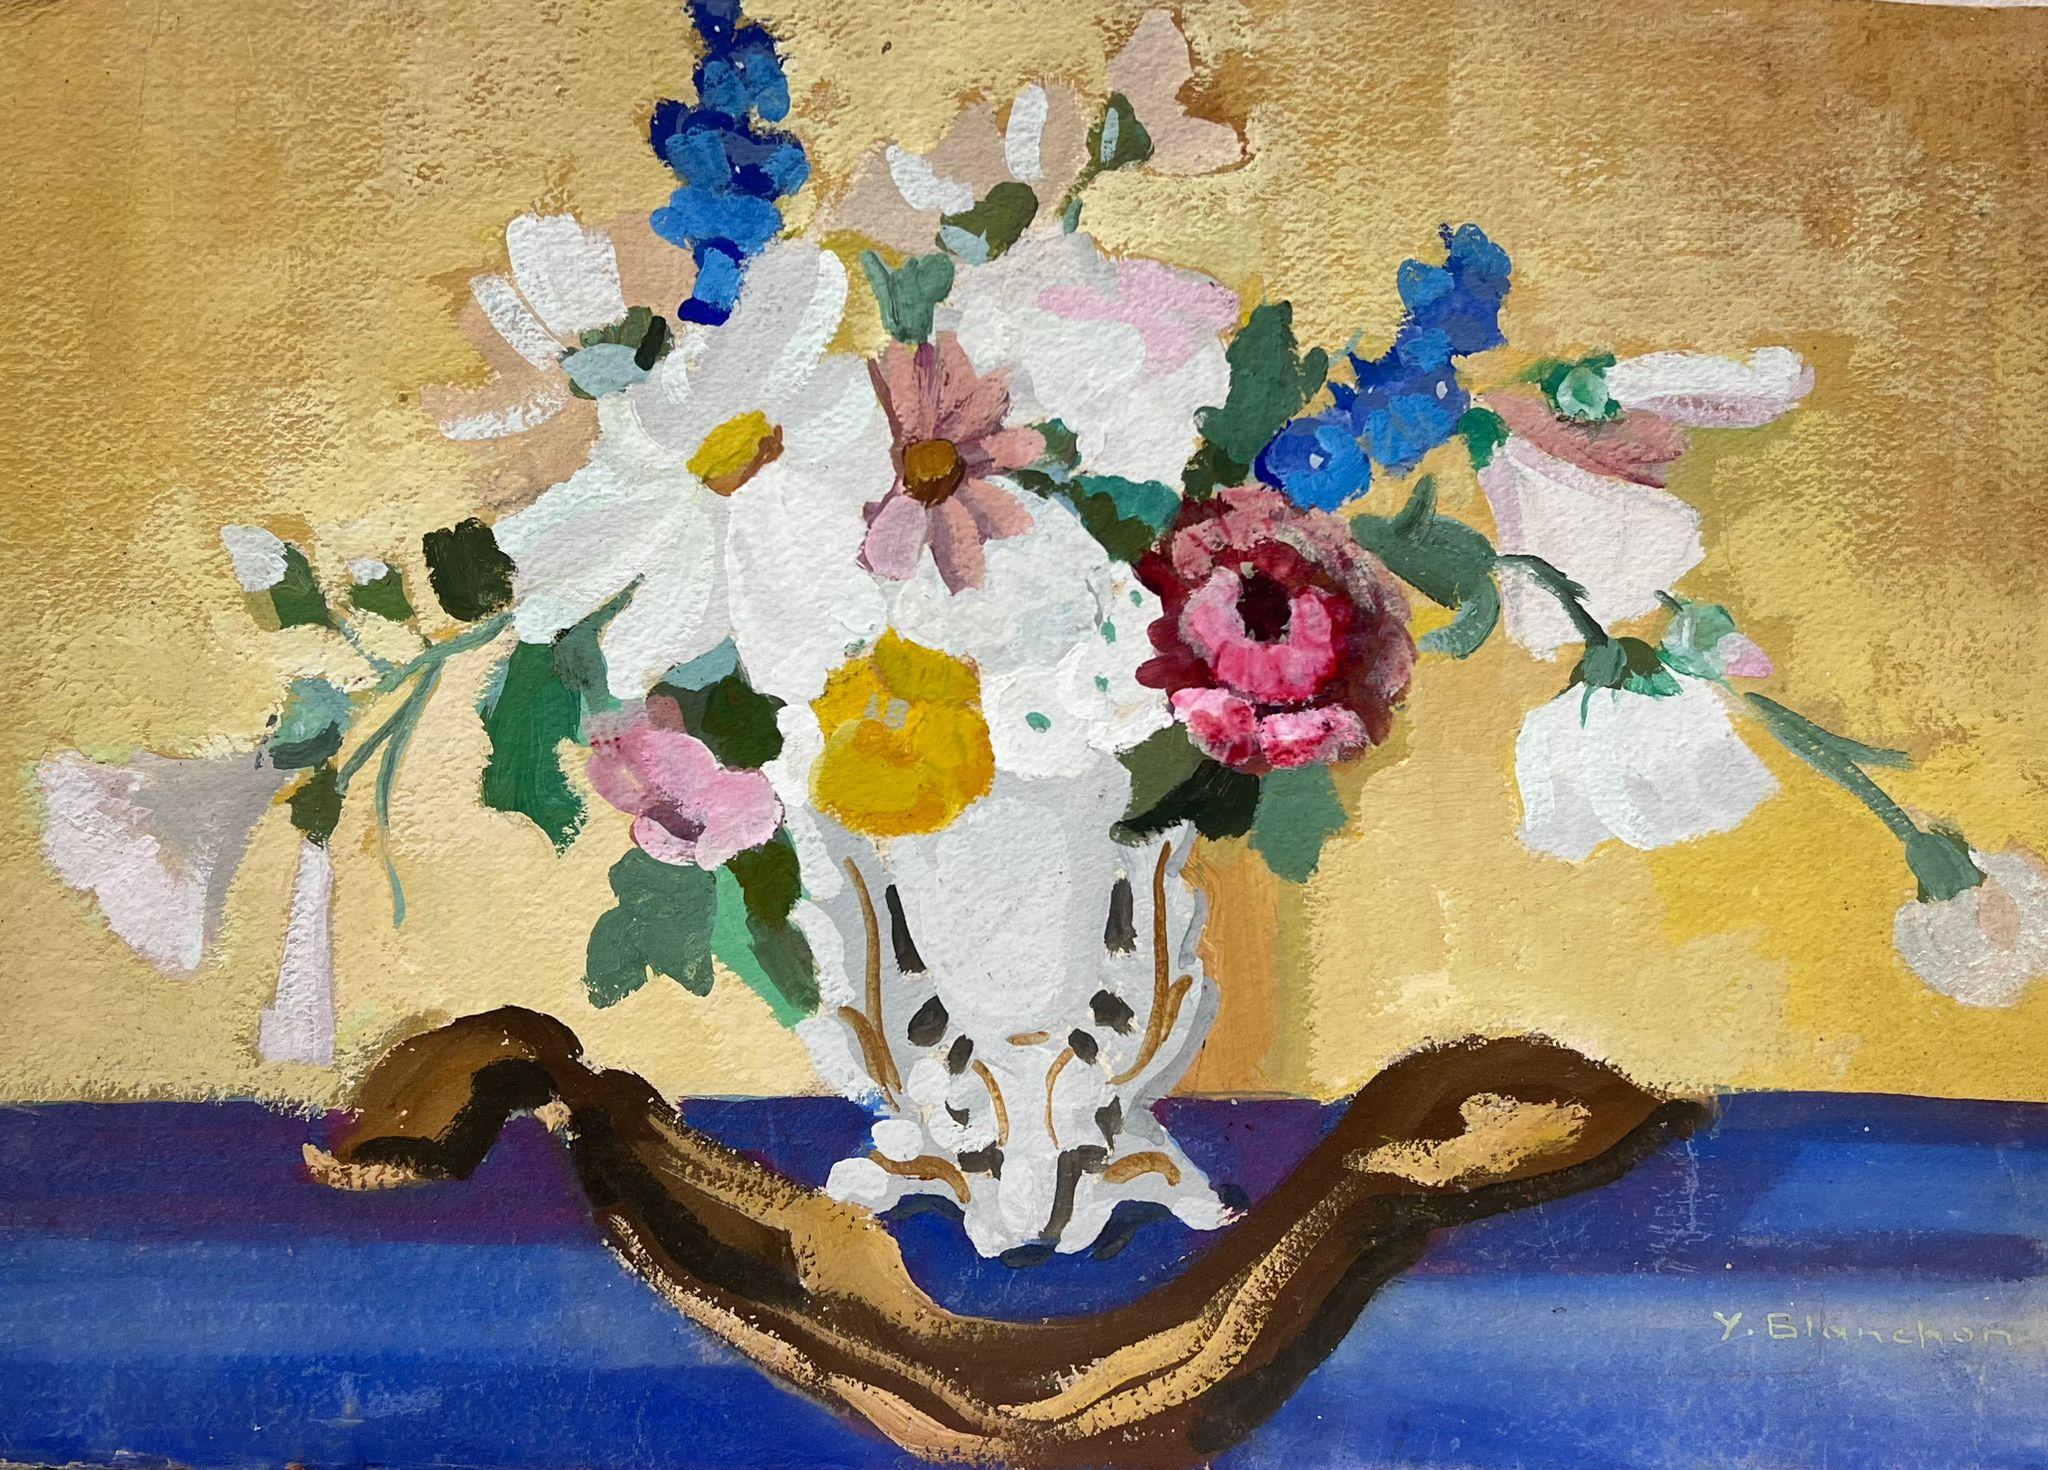 Y. Blanchon Figurative Painting - Flowers In Grand Vase Watercolour 1930's French Impressionist Still Life